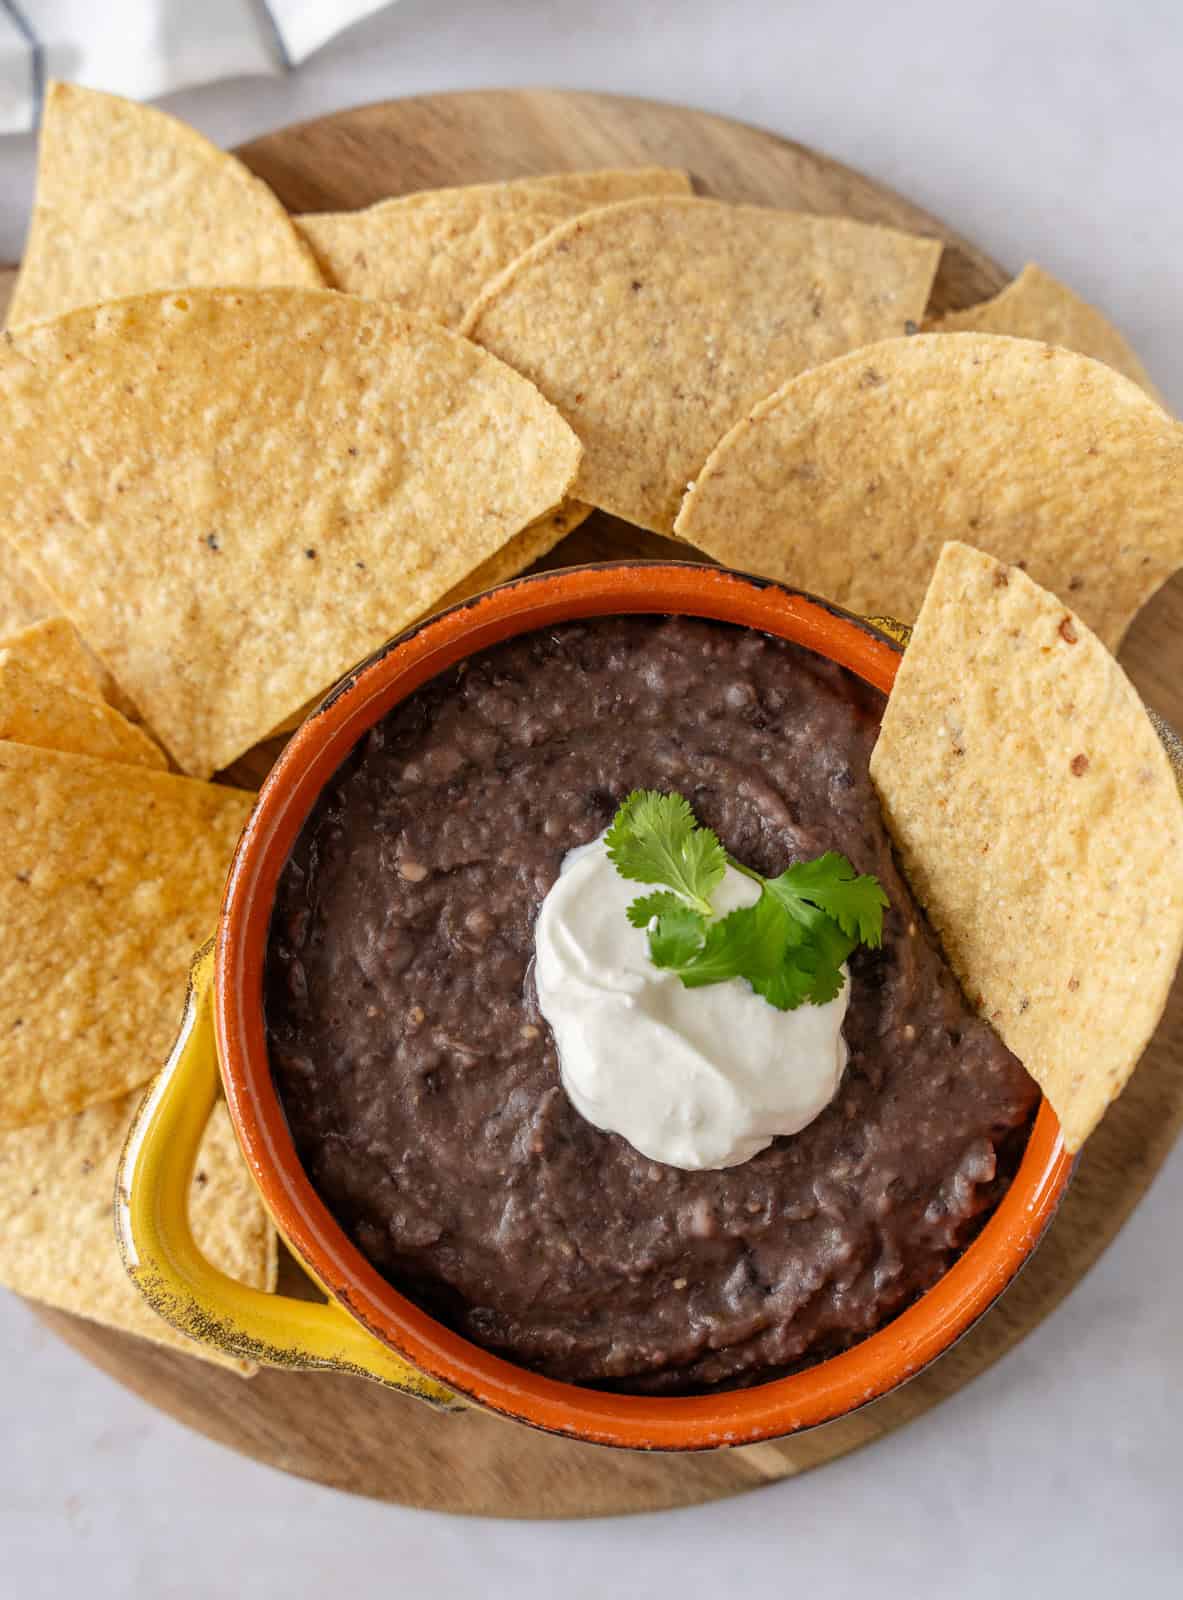 Overhead view of black bean dip on a wooden board with tortilla chips.